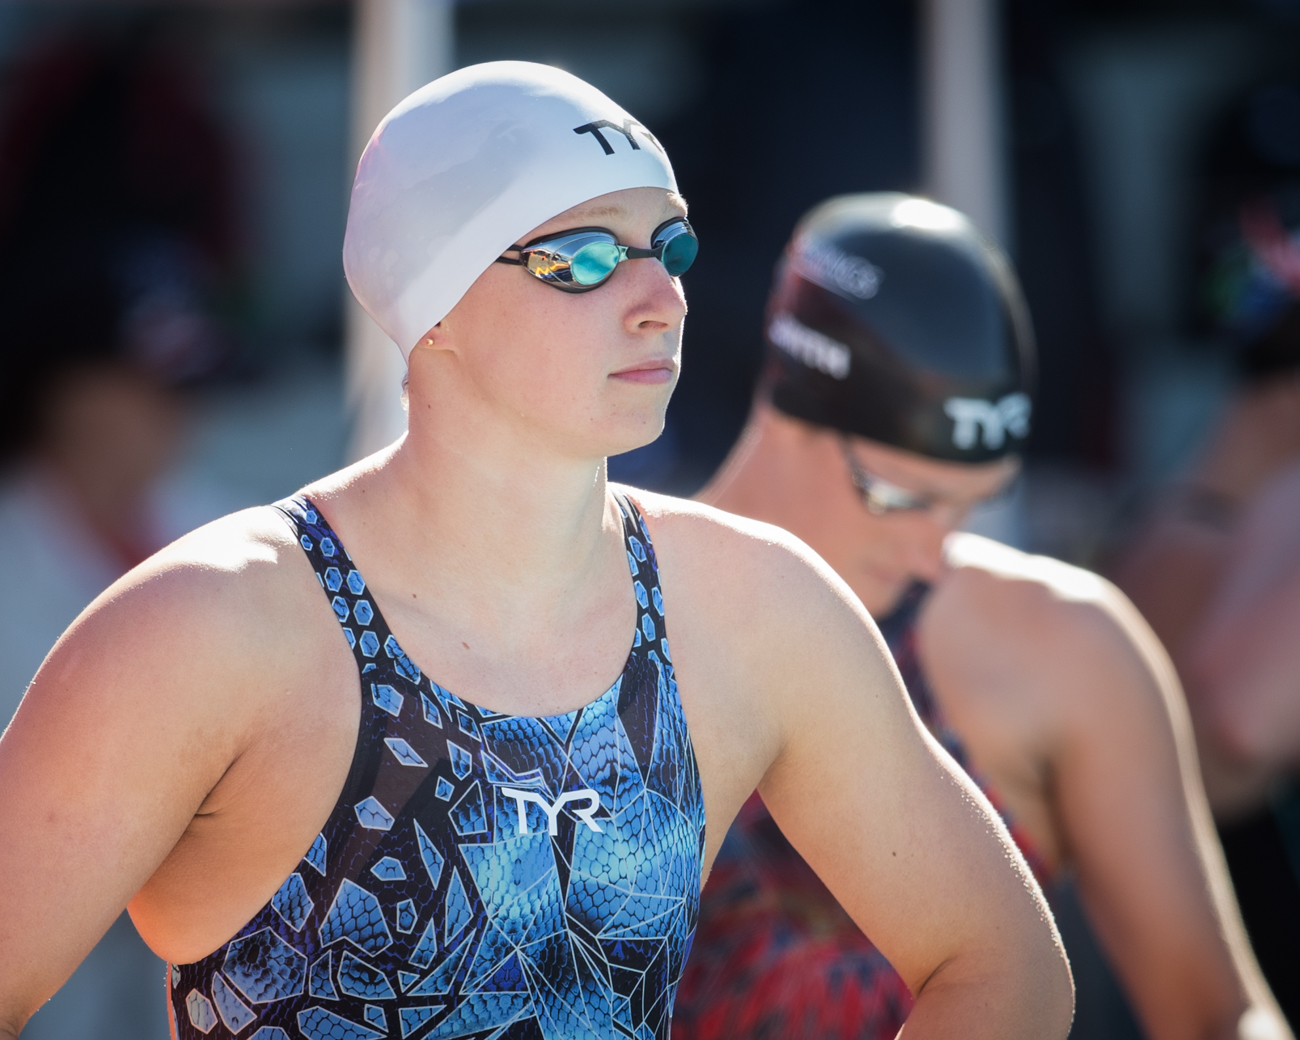 Ledecky Leads PSS Money Lists With $6500 In Greensboro